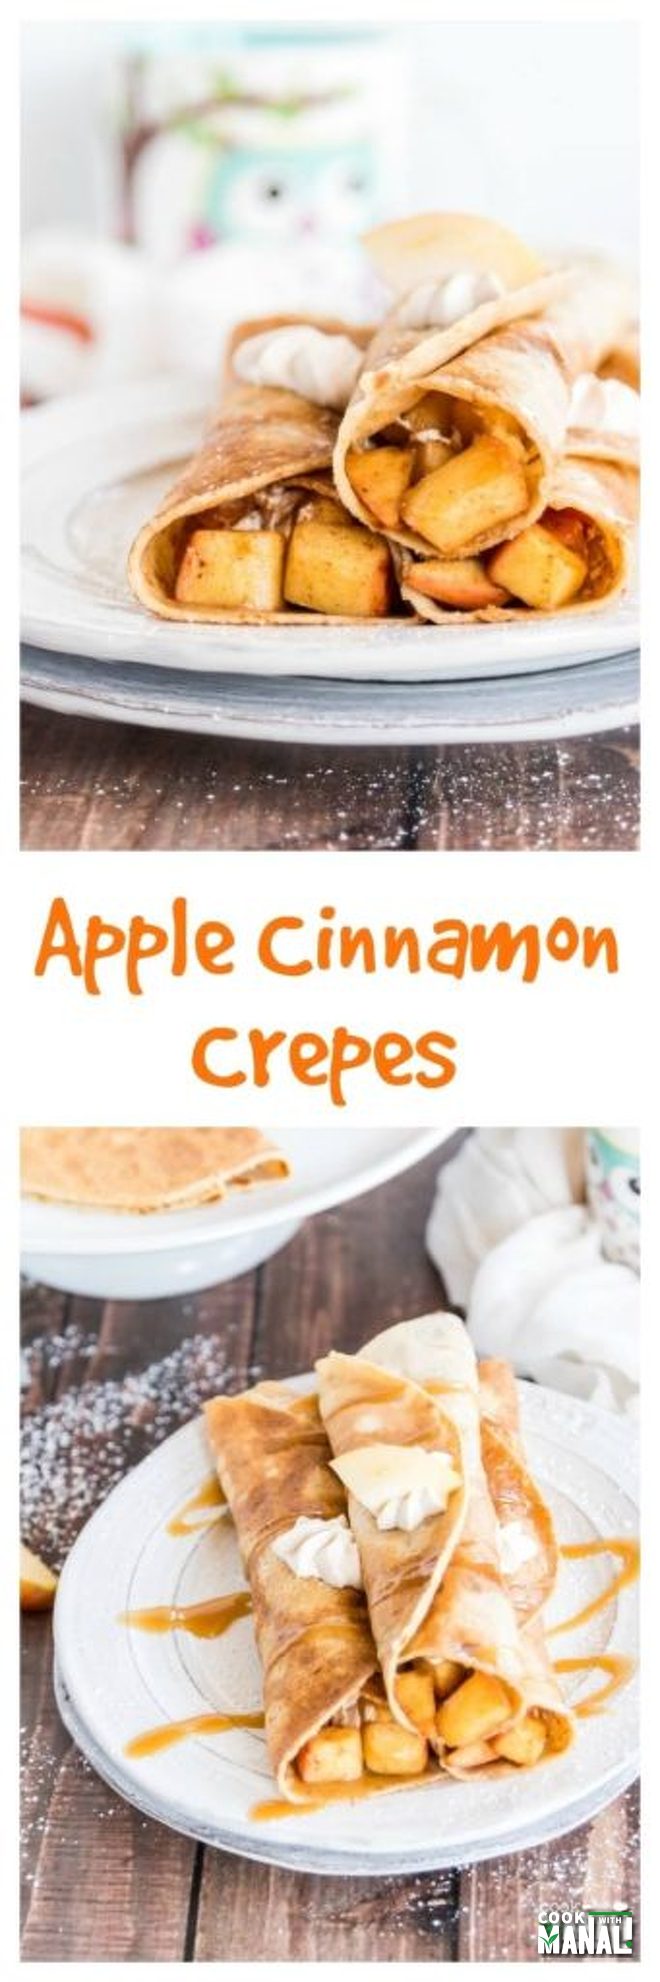 Apple Cinnamon Crepes - Cook With Manali